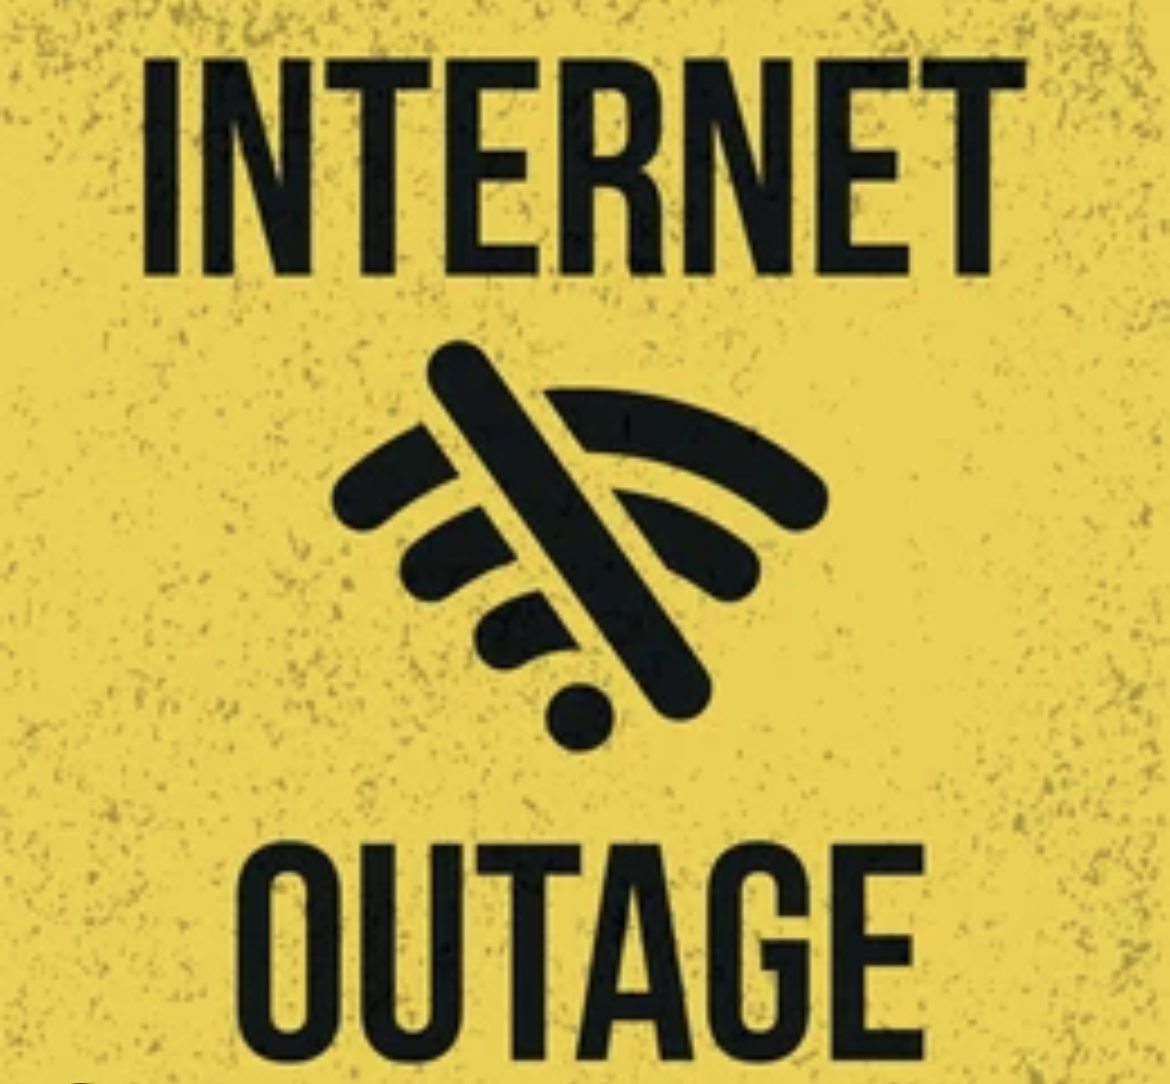 Our apologies but we are having connectivity issues with our WiFi/internet provider. GPTC’s IT team is working diligently to get us back online.